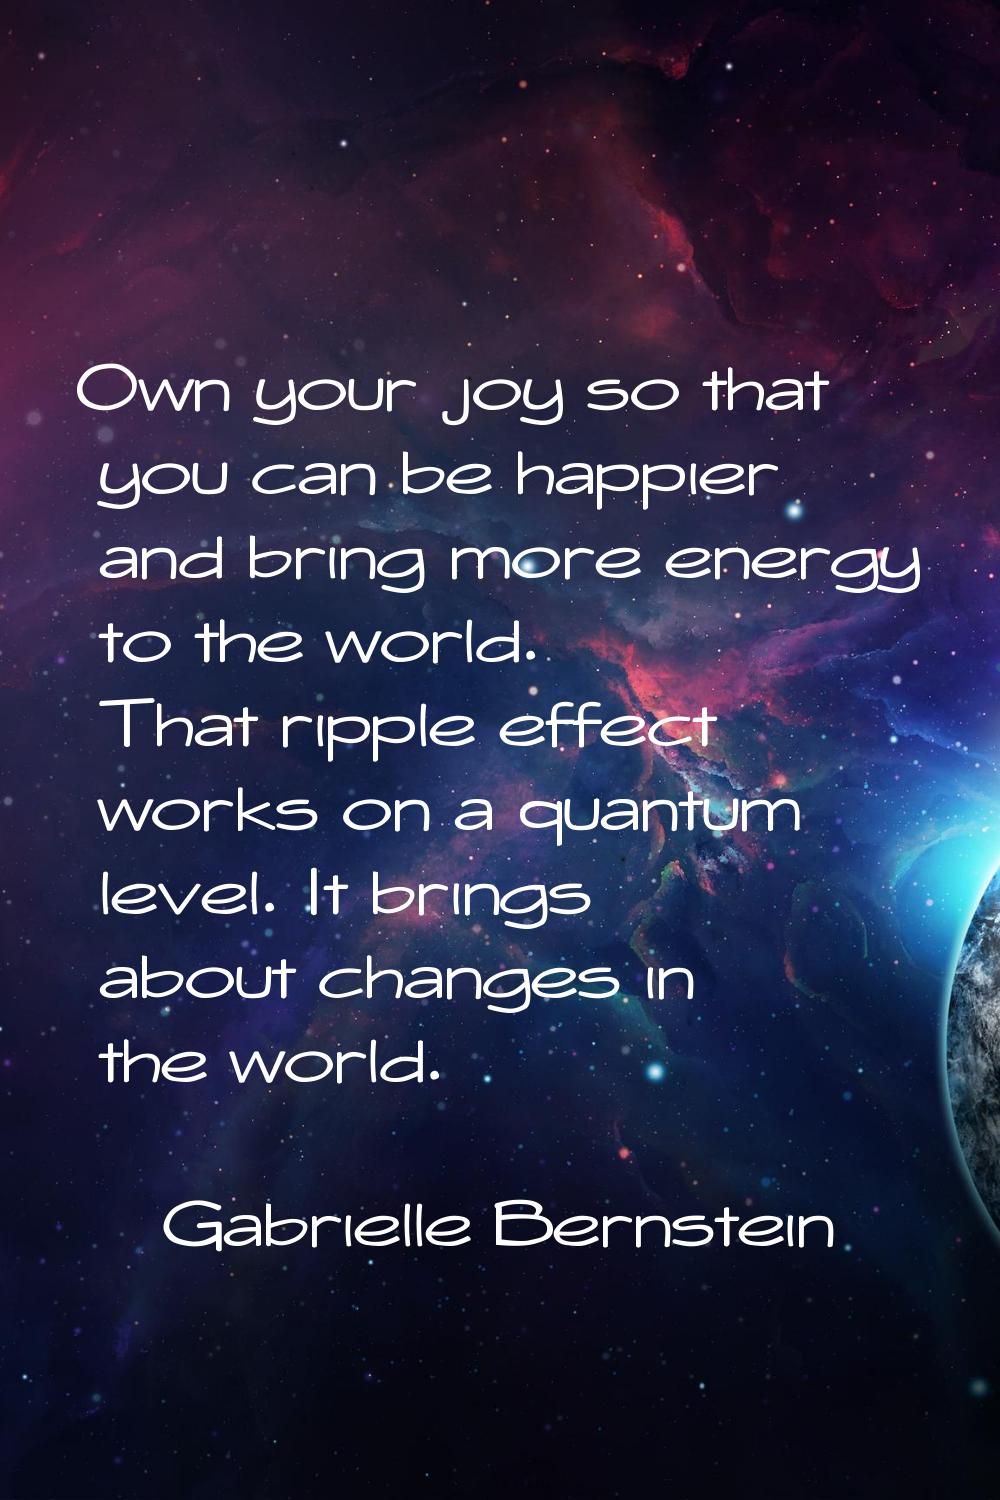 Own your joy so that you can be happier and bring more energy to the world. That ripple effect work